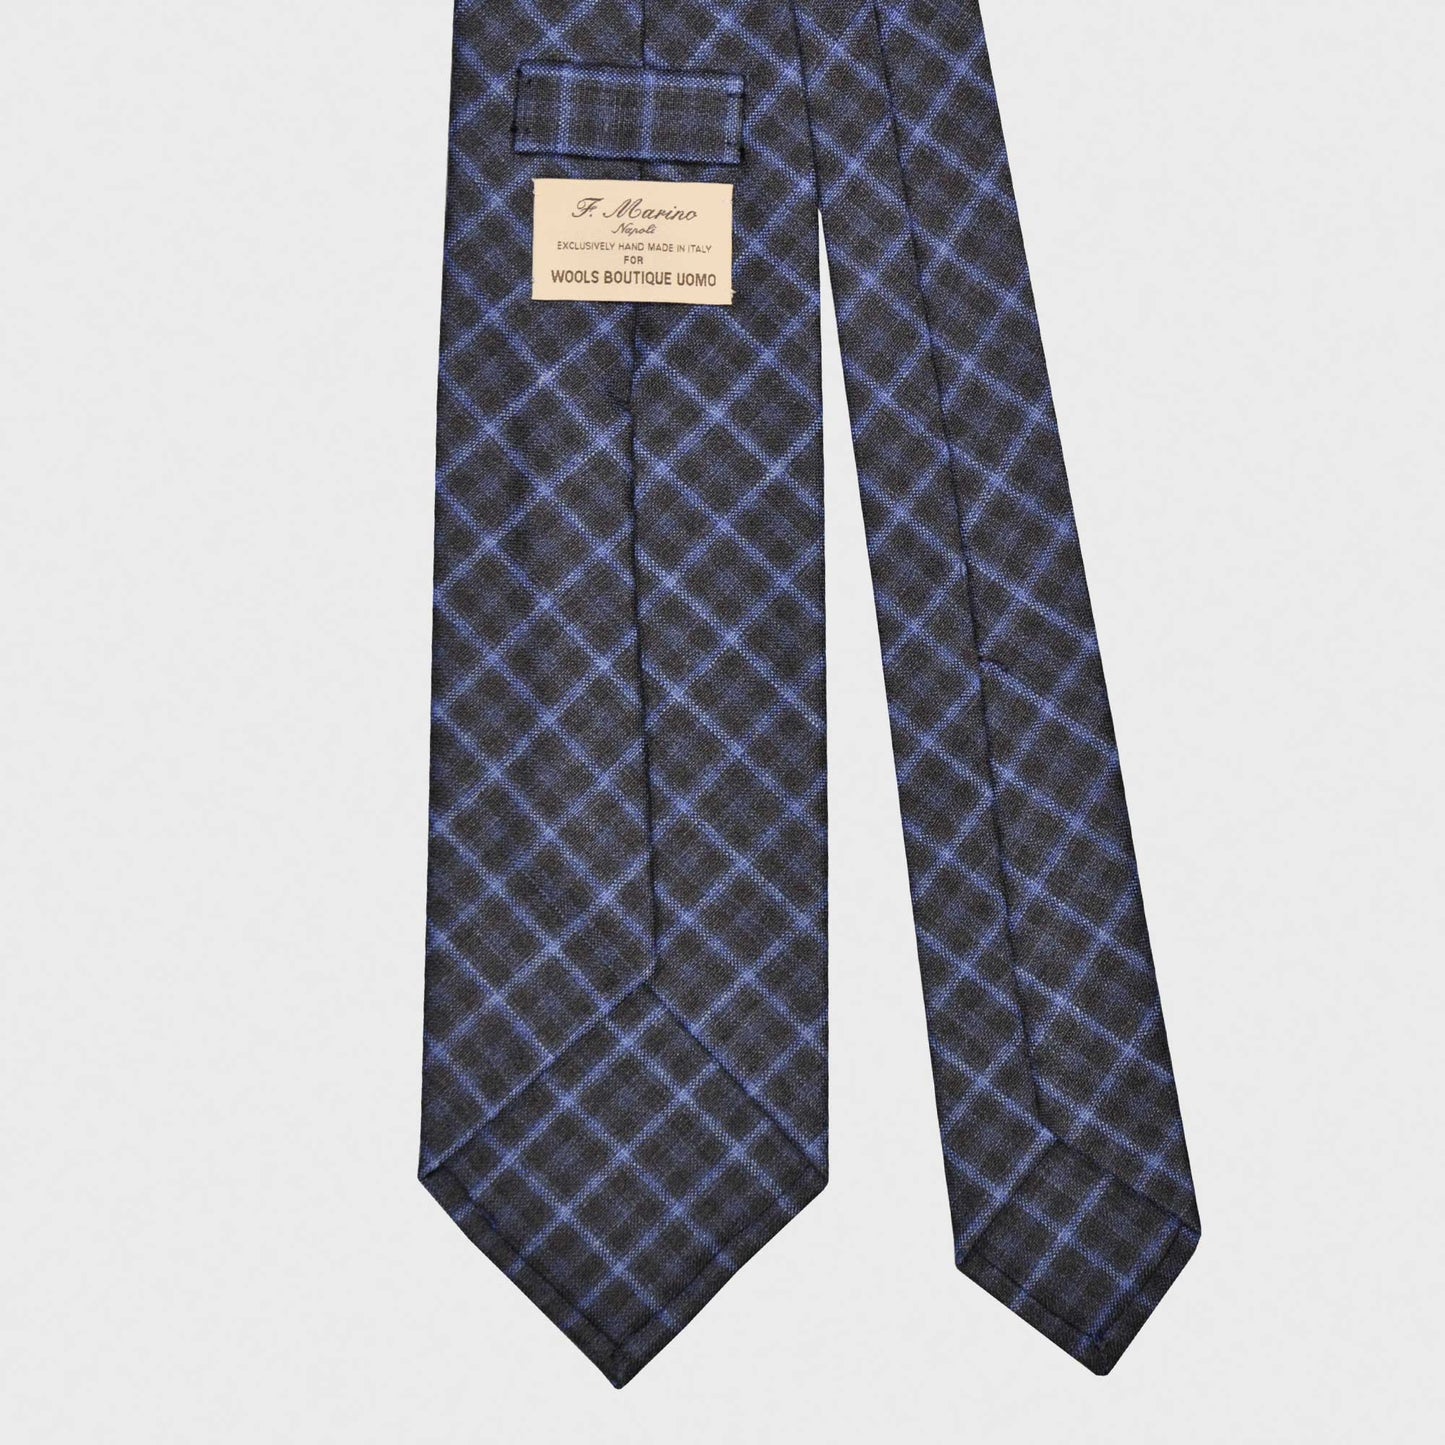 F.Marino Wool Tie 3 Folds Checked Pervinca Blue-Wools Boutique Uomo